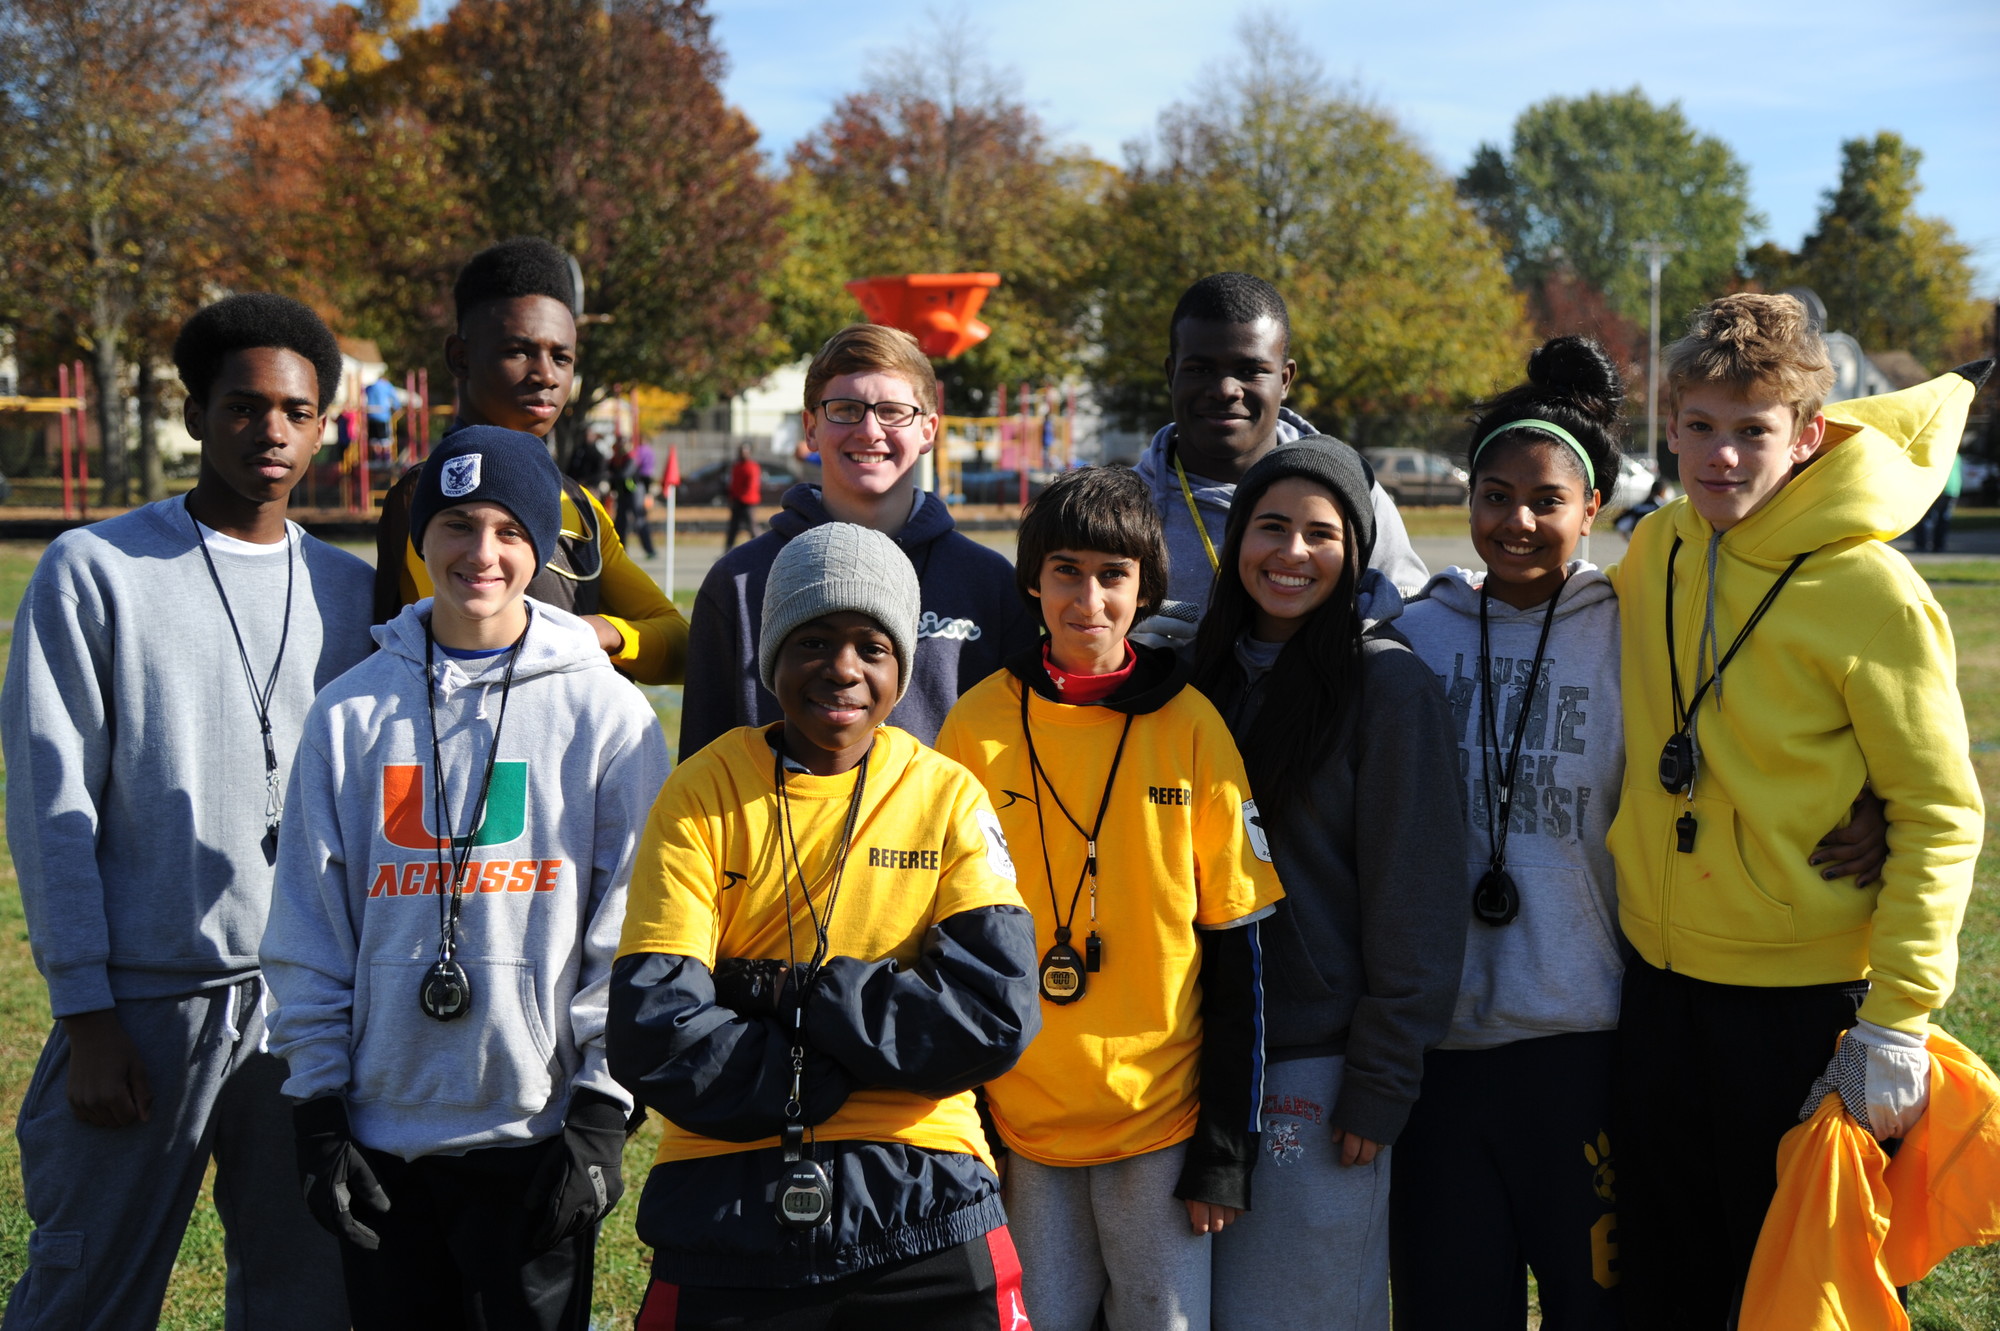 The Eagles referees play an important role. Back row from left were Jared Anderson, Malcom Bell, Kyle O’Brien and Kofi Eonsu. Front row from left were Abraham Mitchell, David Ikechukwu, Kamran Vakil, Breanna Melendez, Victoria Ramirez and Evan Batsford.